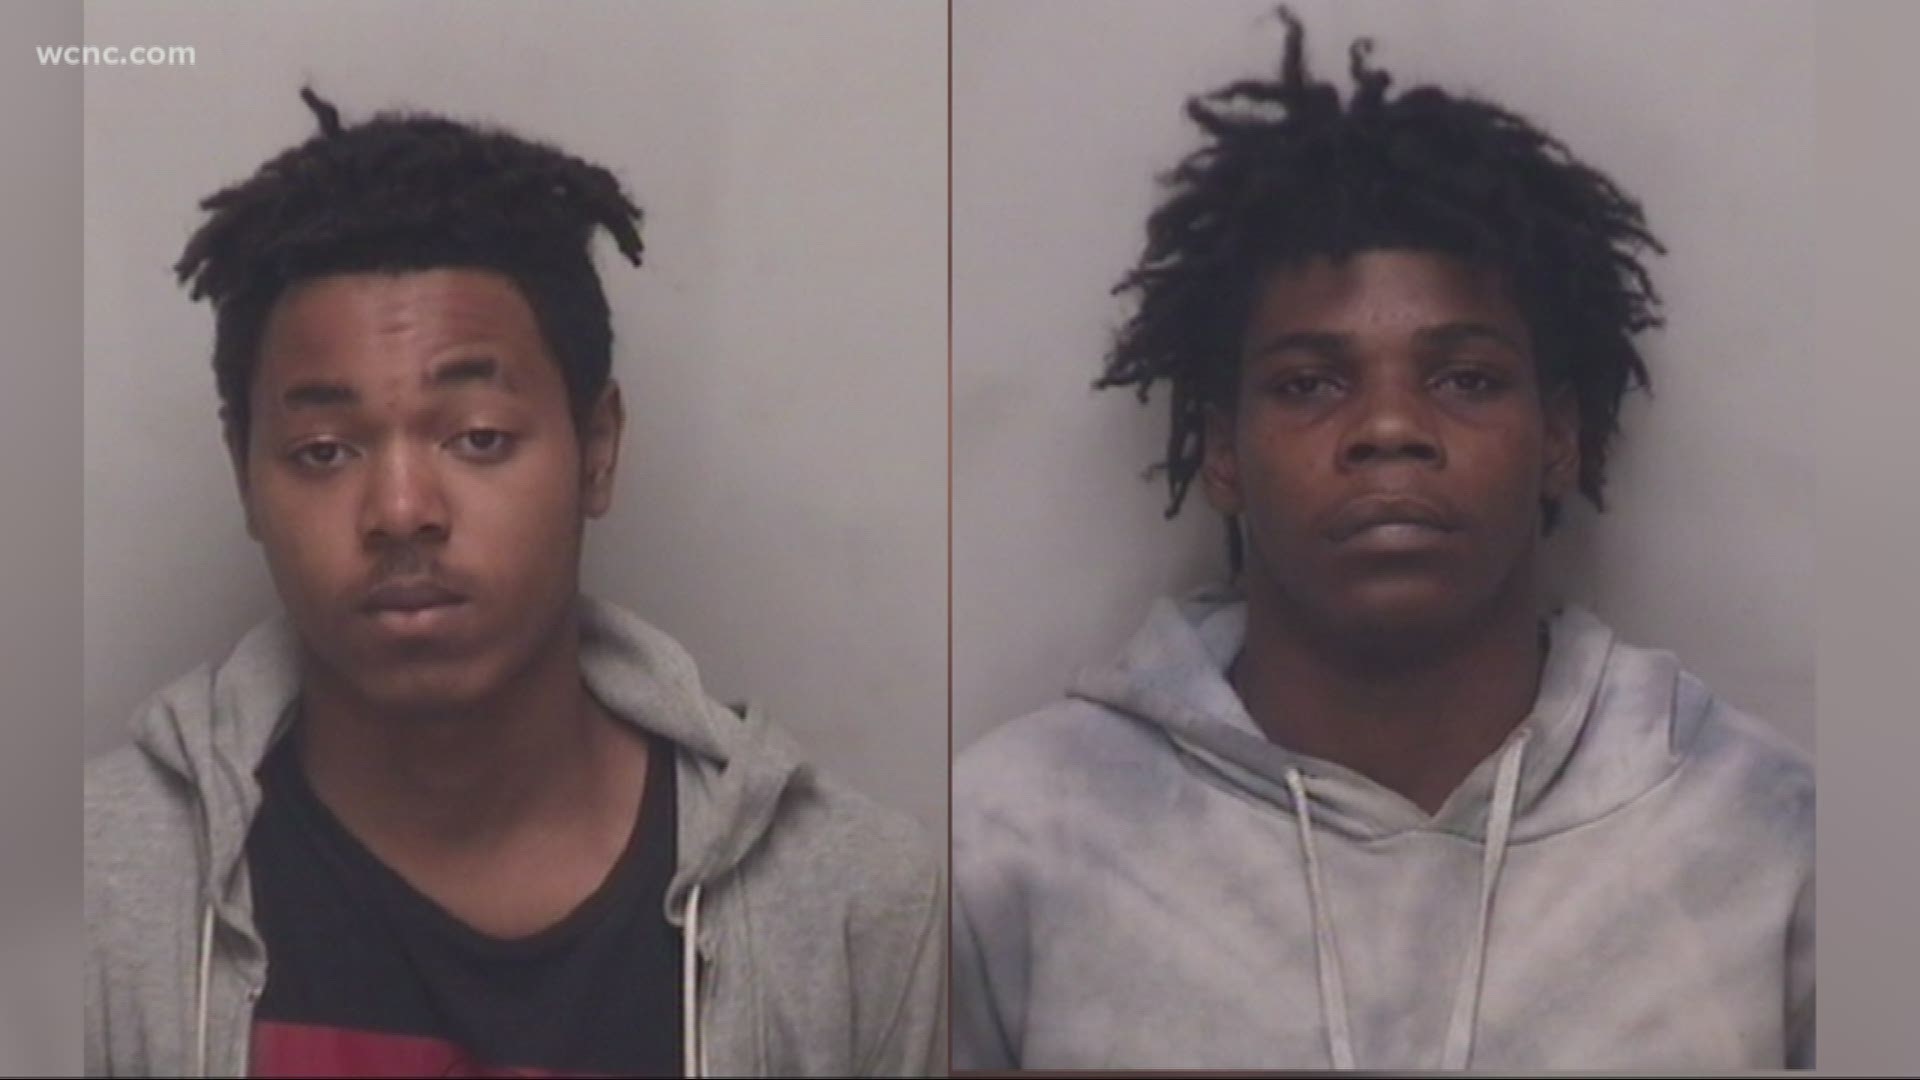 Kenyatta Belton, Jr and Ronald Pruitt are being held without bond in the Rowan County Jail. One suspect is still on the run, officials say.